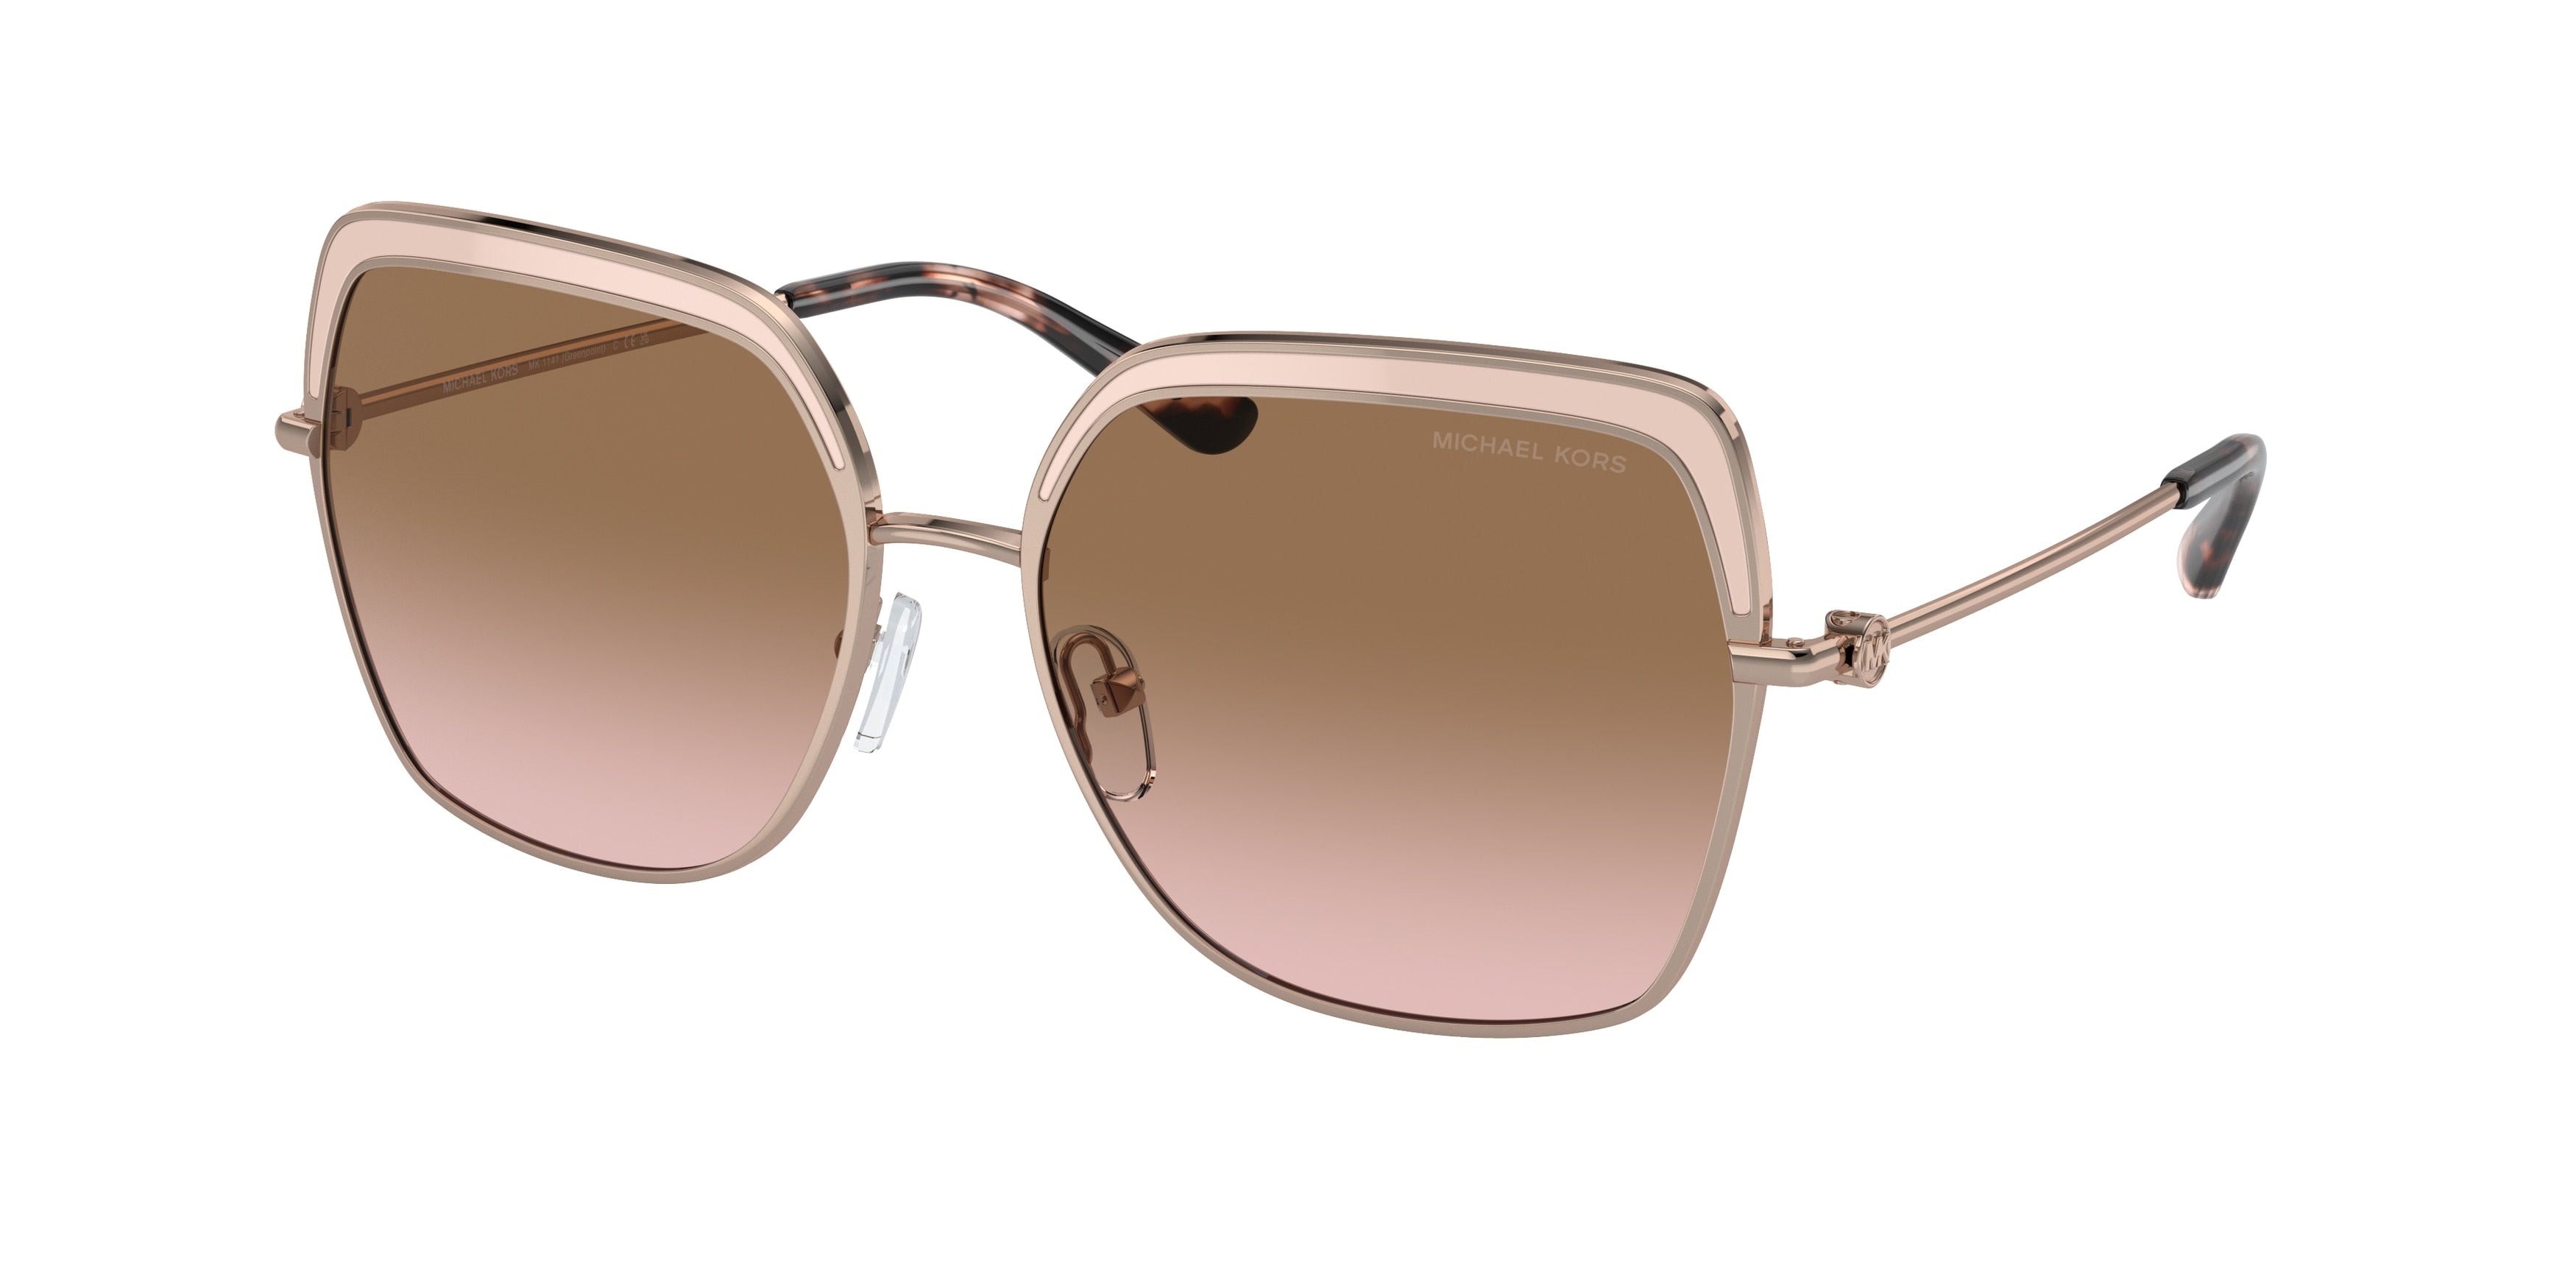 Michael Kors GREENPOINT MK1141 Square Sunglasses  110811-Rose Gold 57-140-16 - Color Map Gold